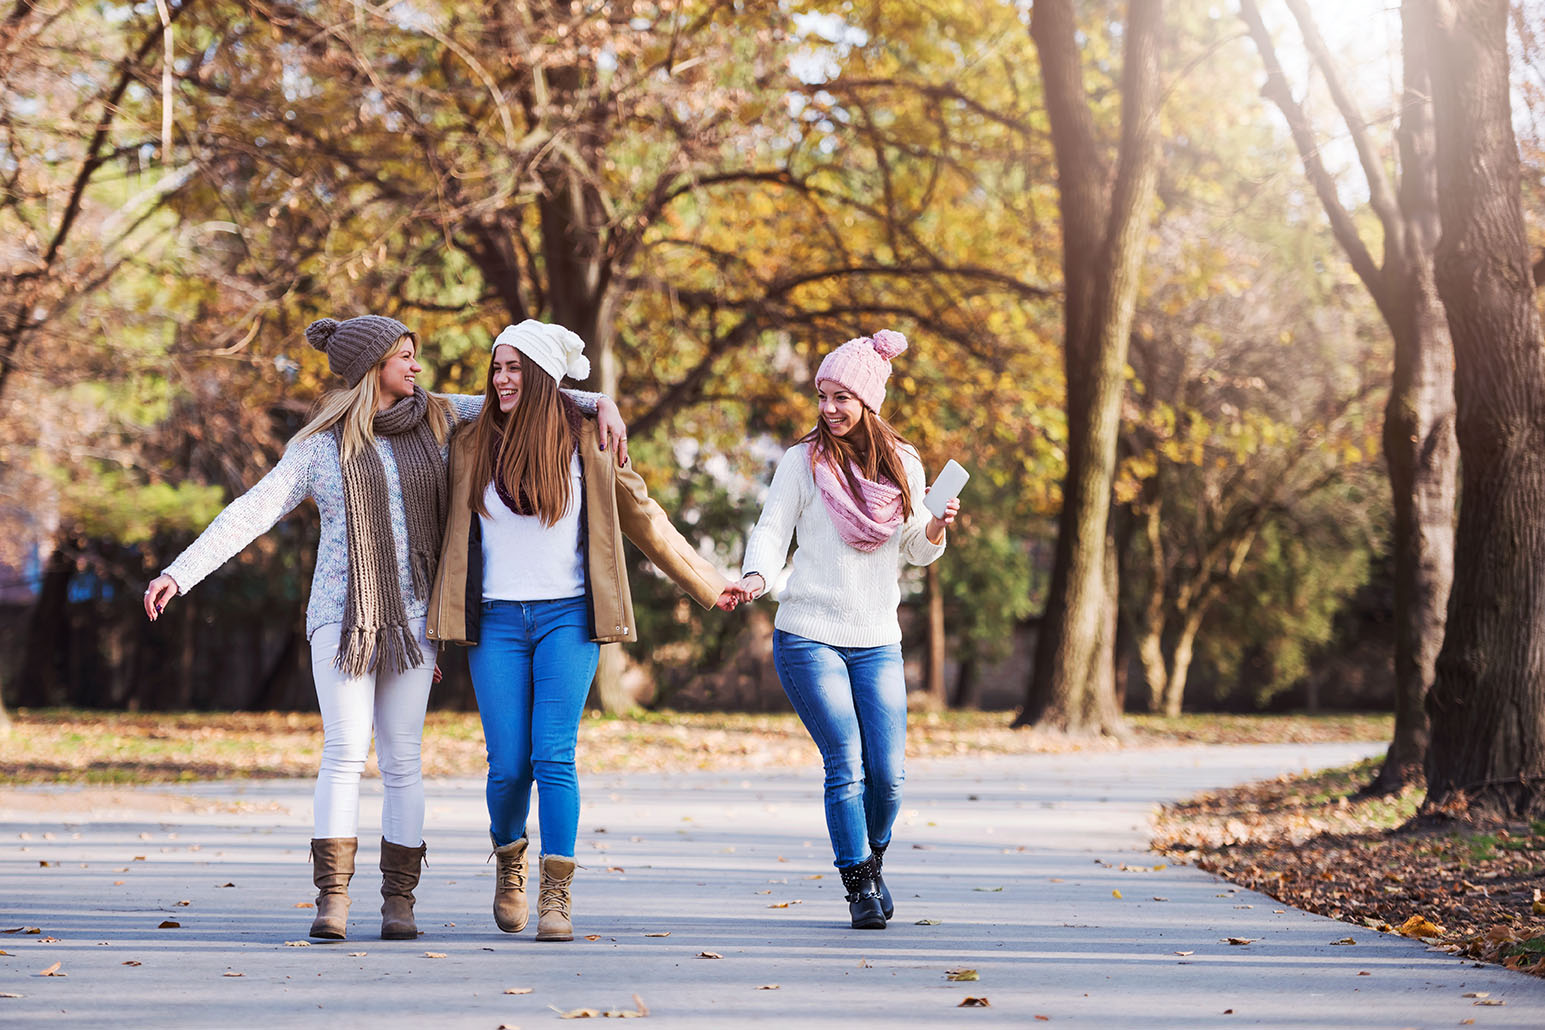 Group of smiling college girls walking in the park - friendship